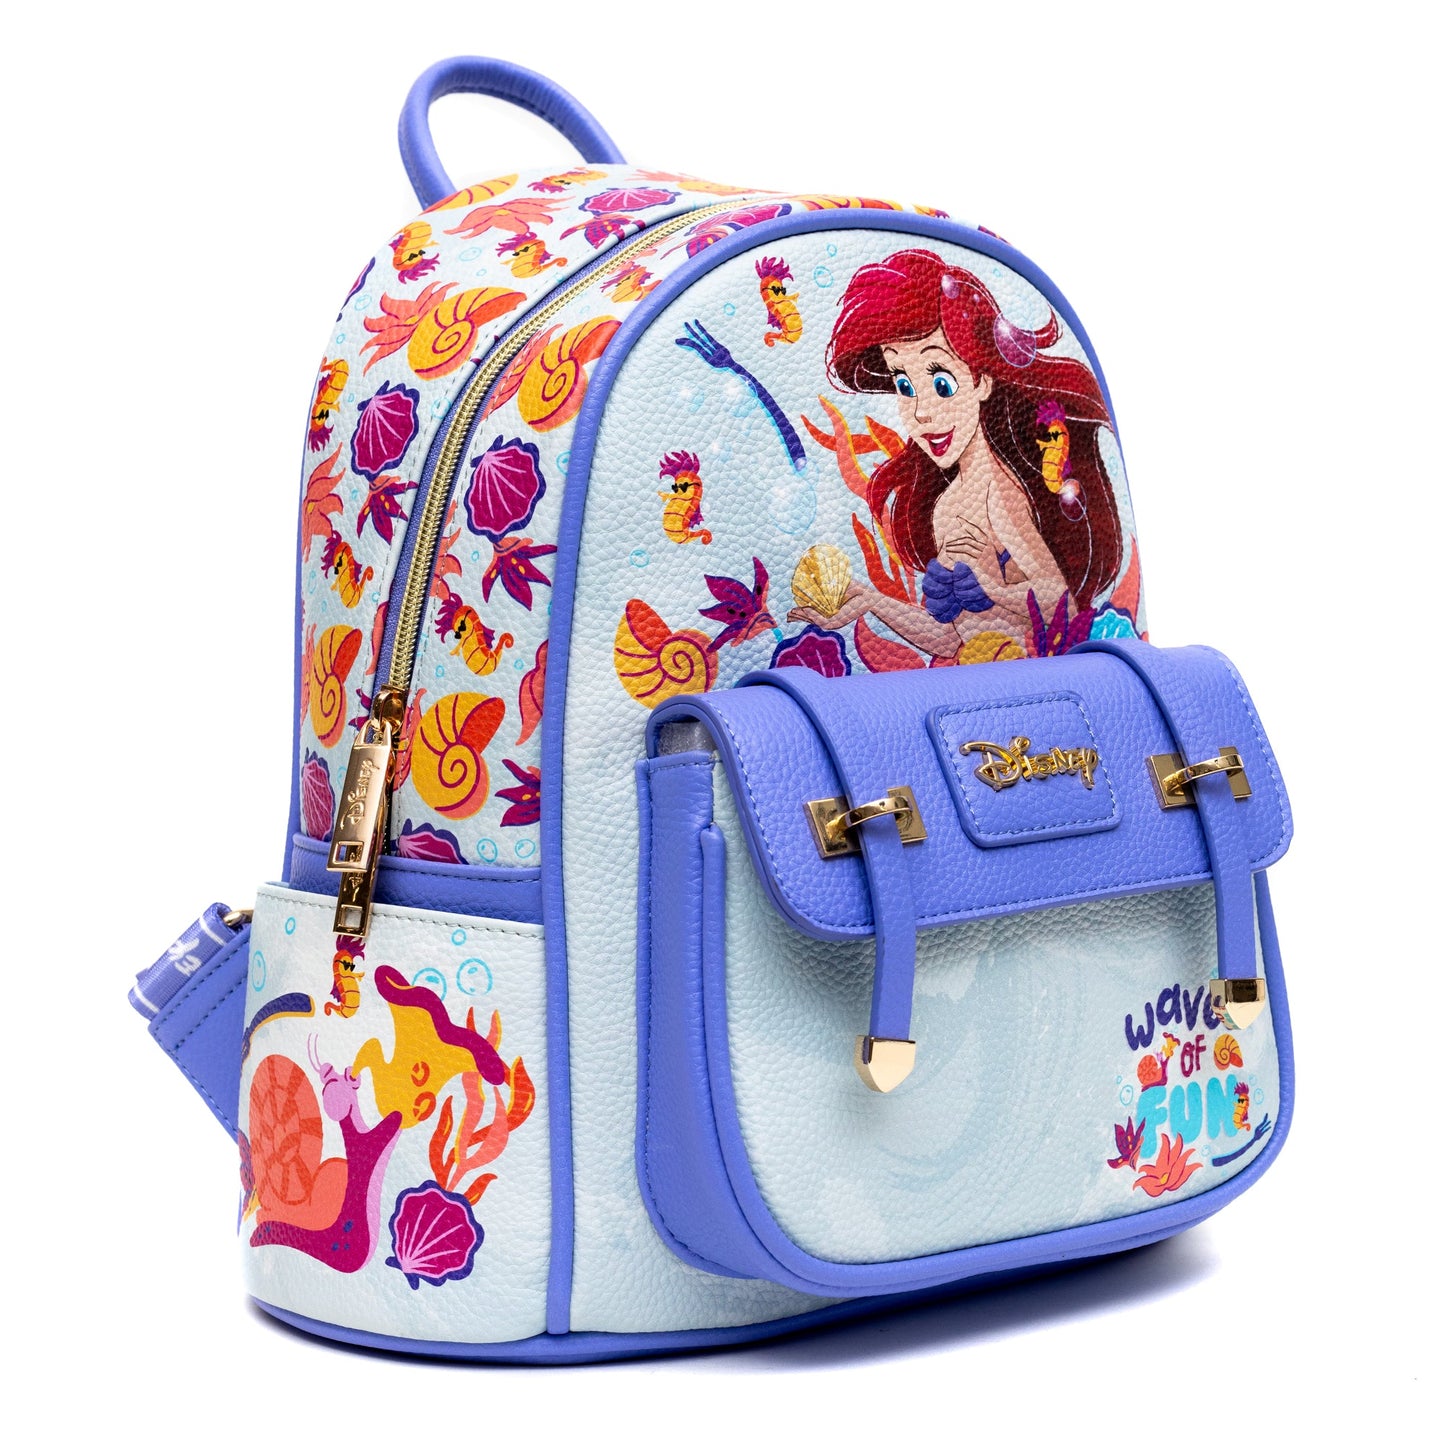 Exclusive Limited Edition-Little Mermaid Vegan Leather Backpack